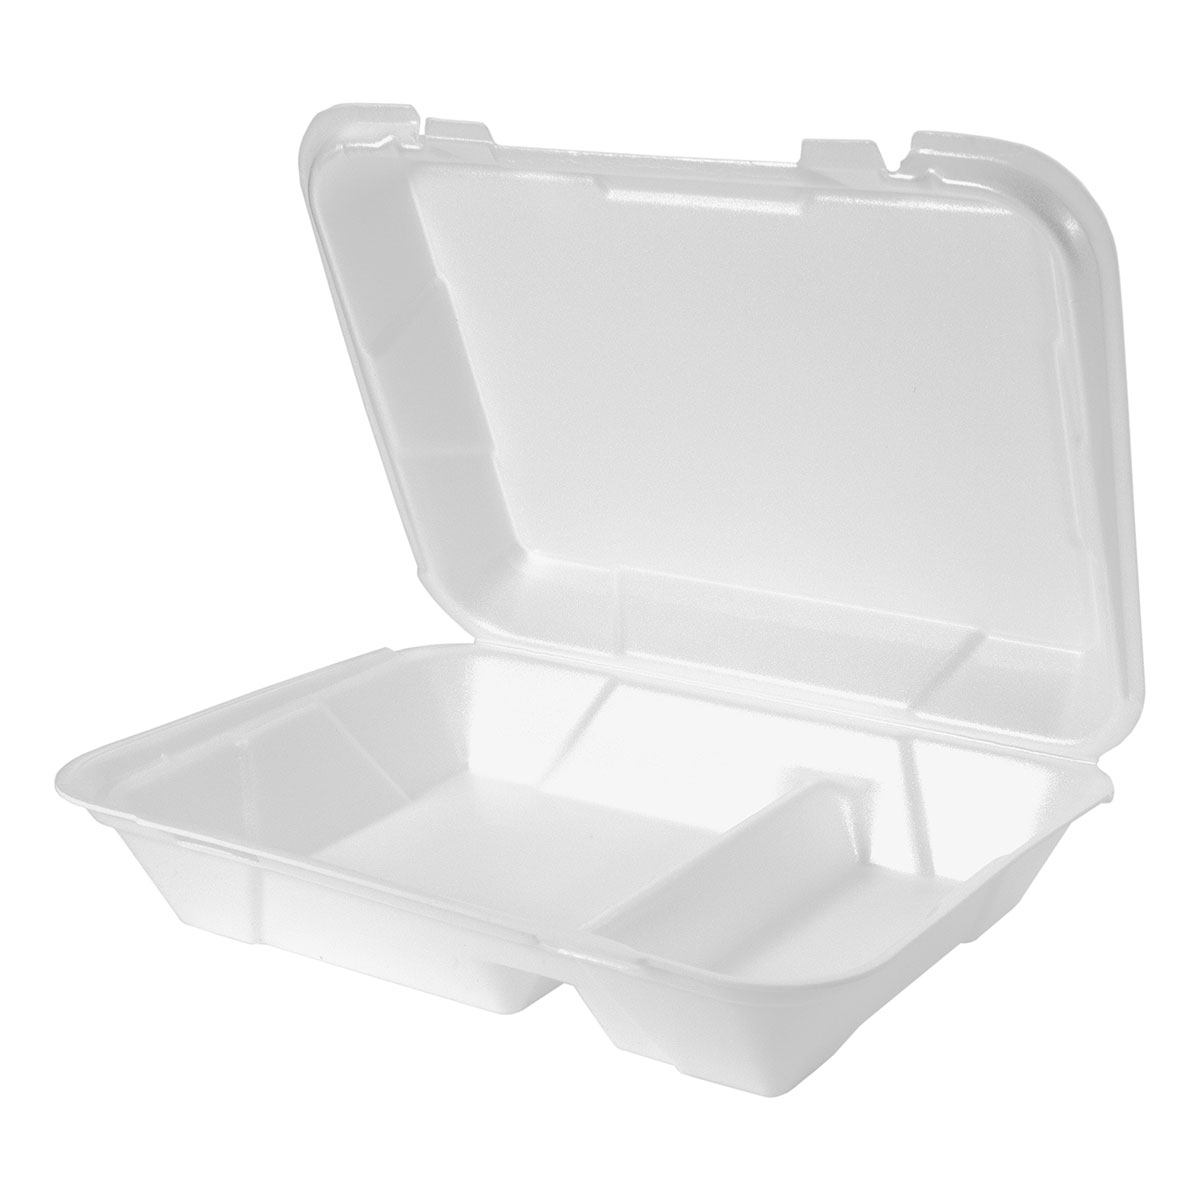 White 13" x 9" Two-Compartment Snap It Lock Hinged Rectangle Container